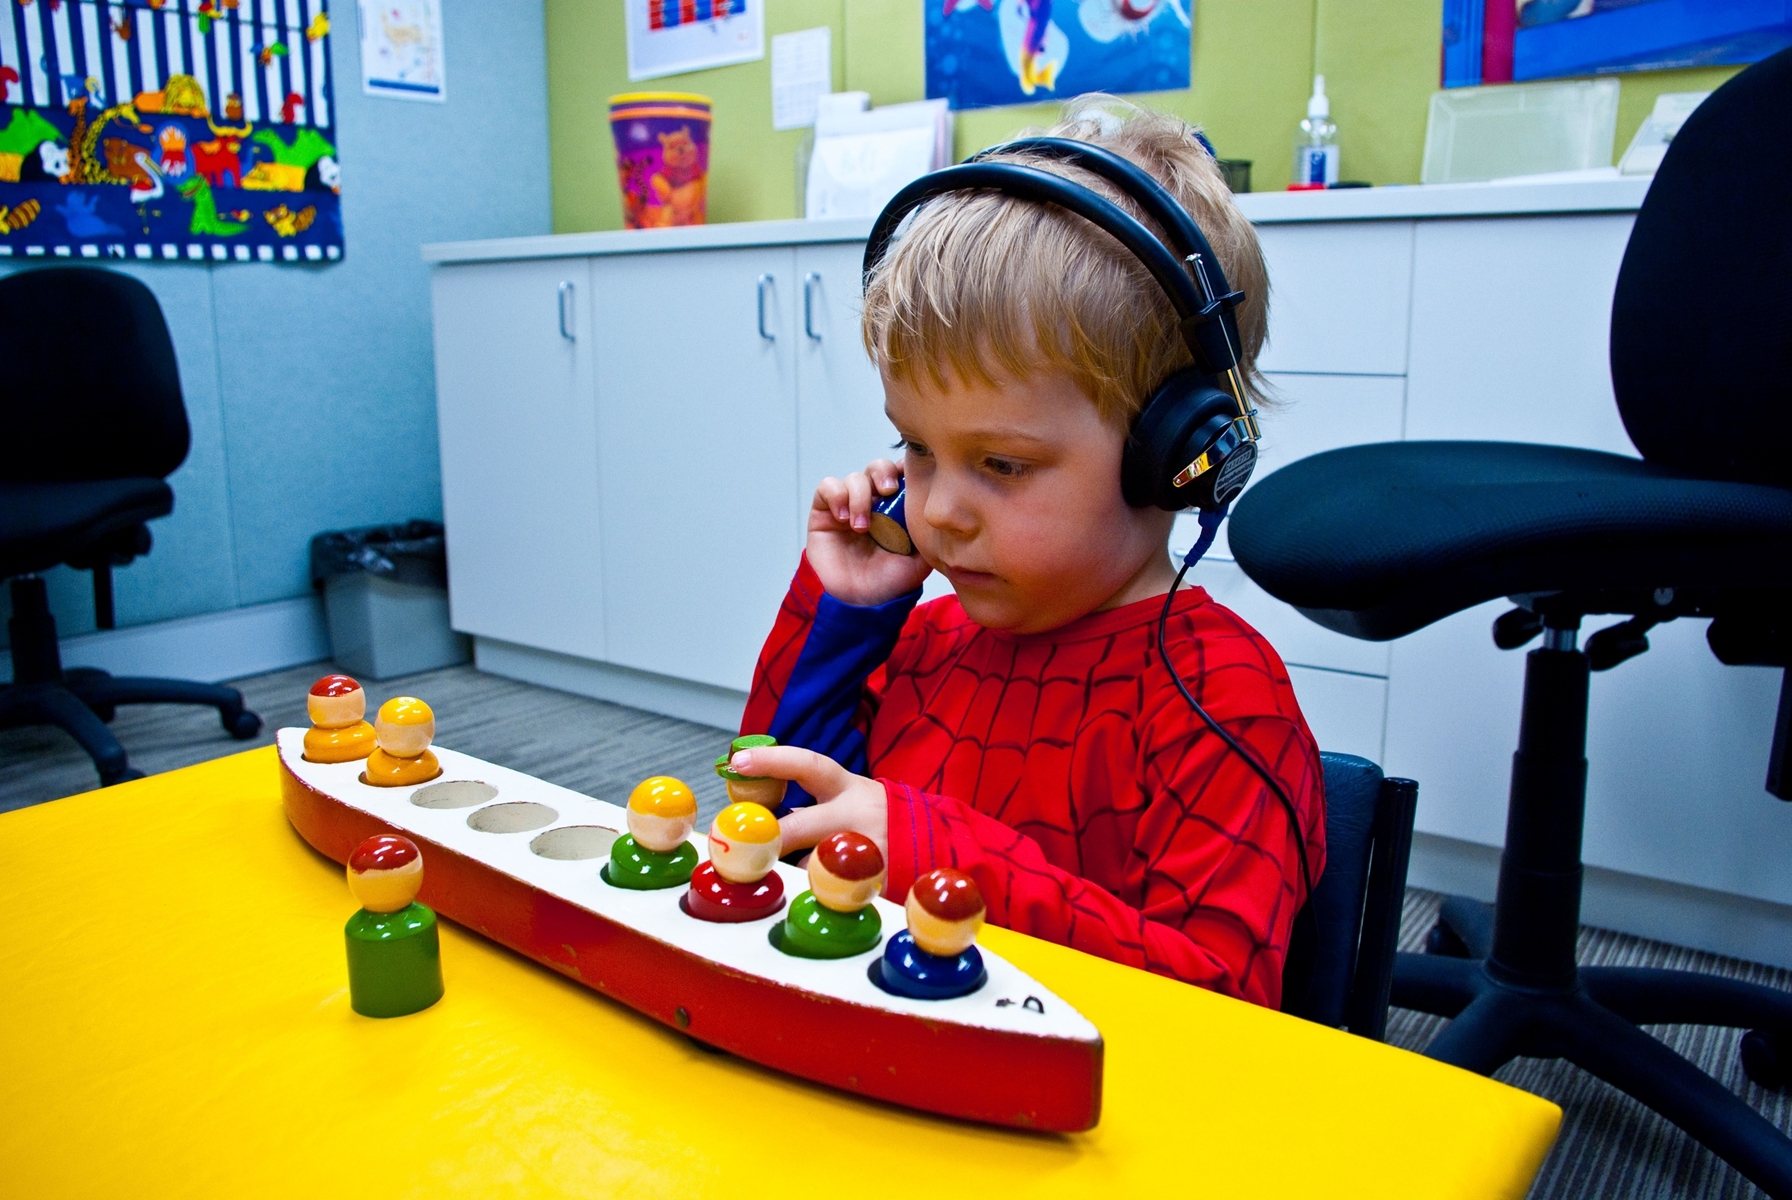 Child wearing headphones and holding a toy